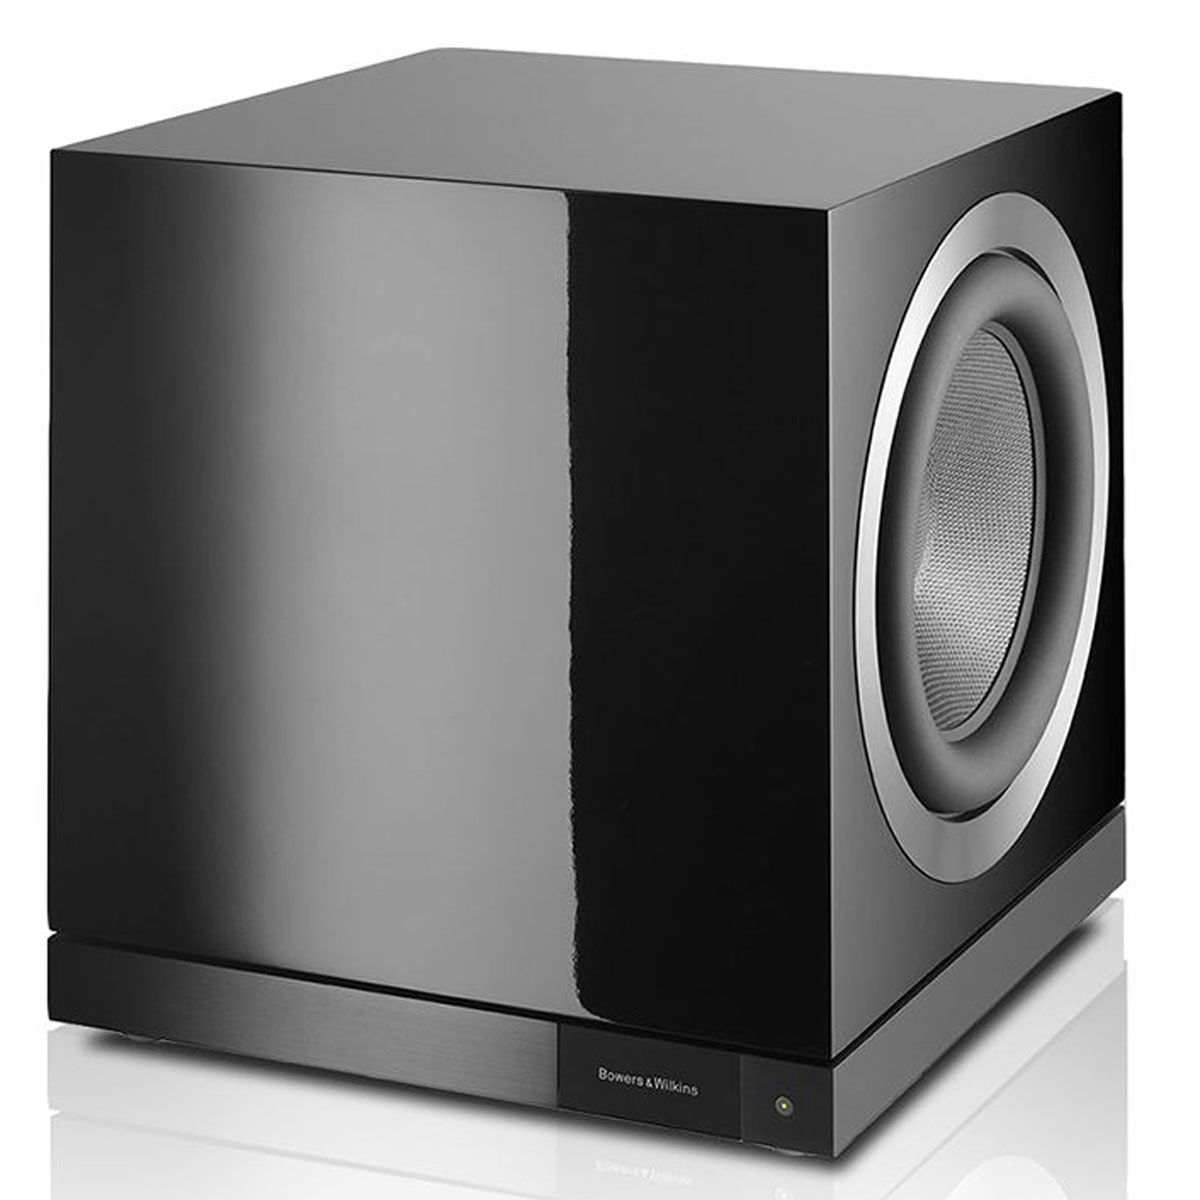 Bowers & Wilkins DB1D Subwoofer - Gloss Black - Side angle no grille